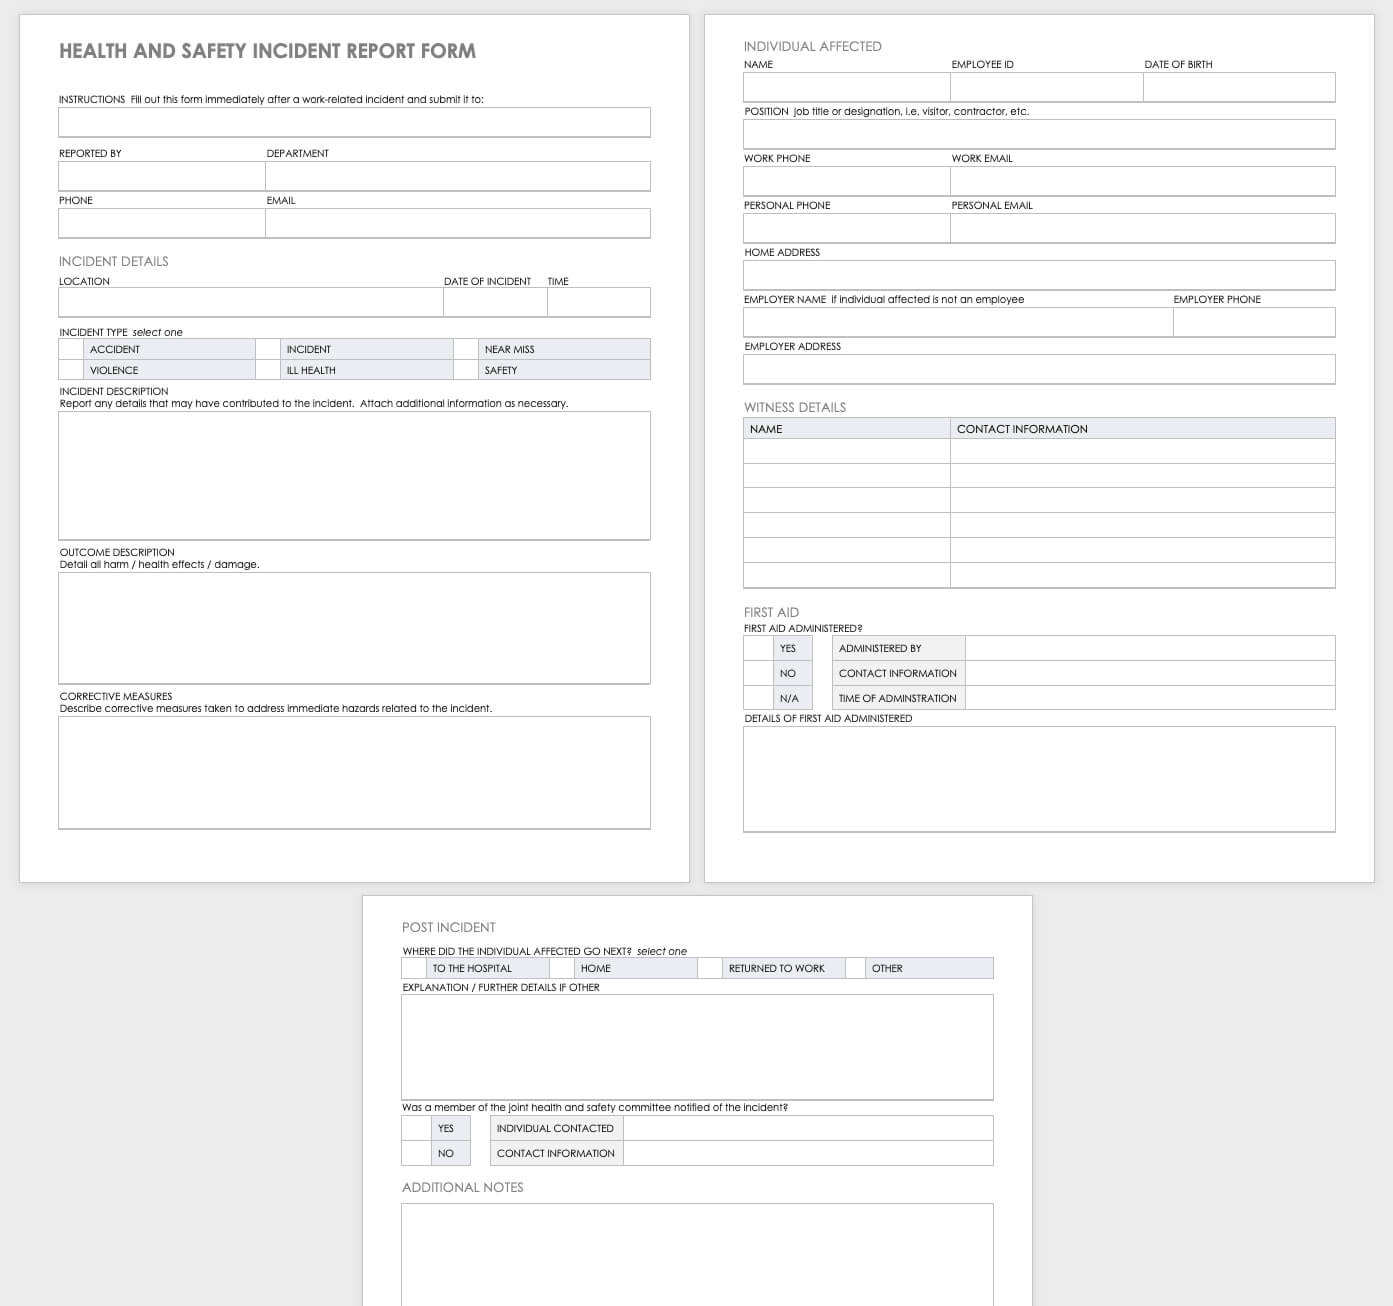 Free Workplace Accident Report Templates | Smartsheet For Health And Safety Incident Report Form Template